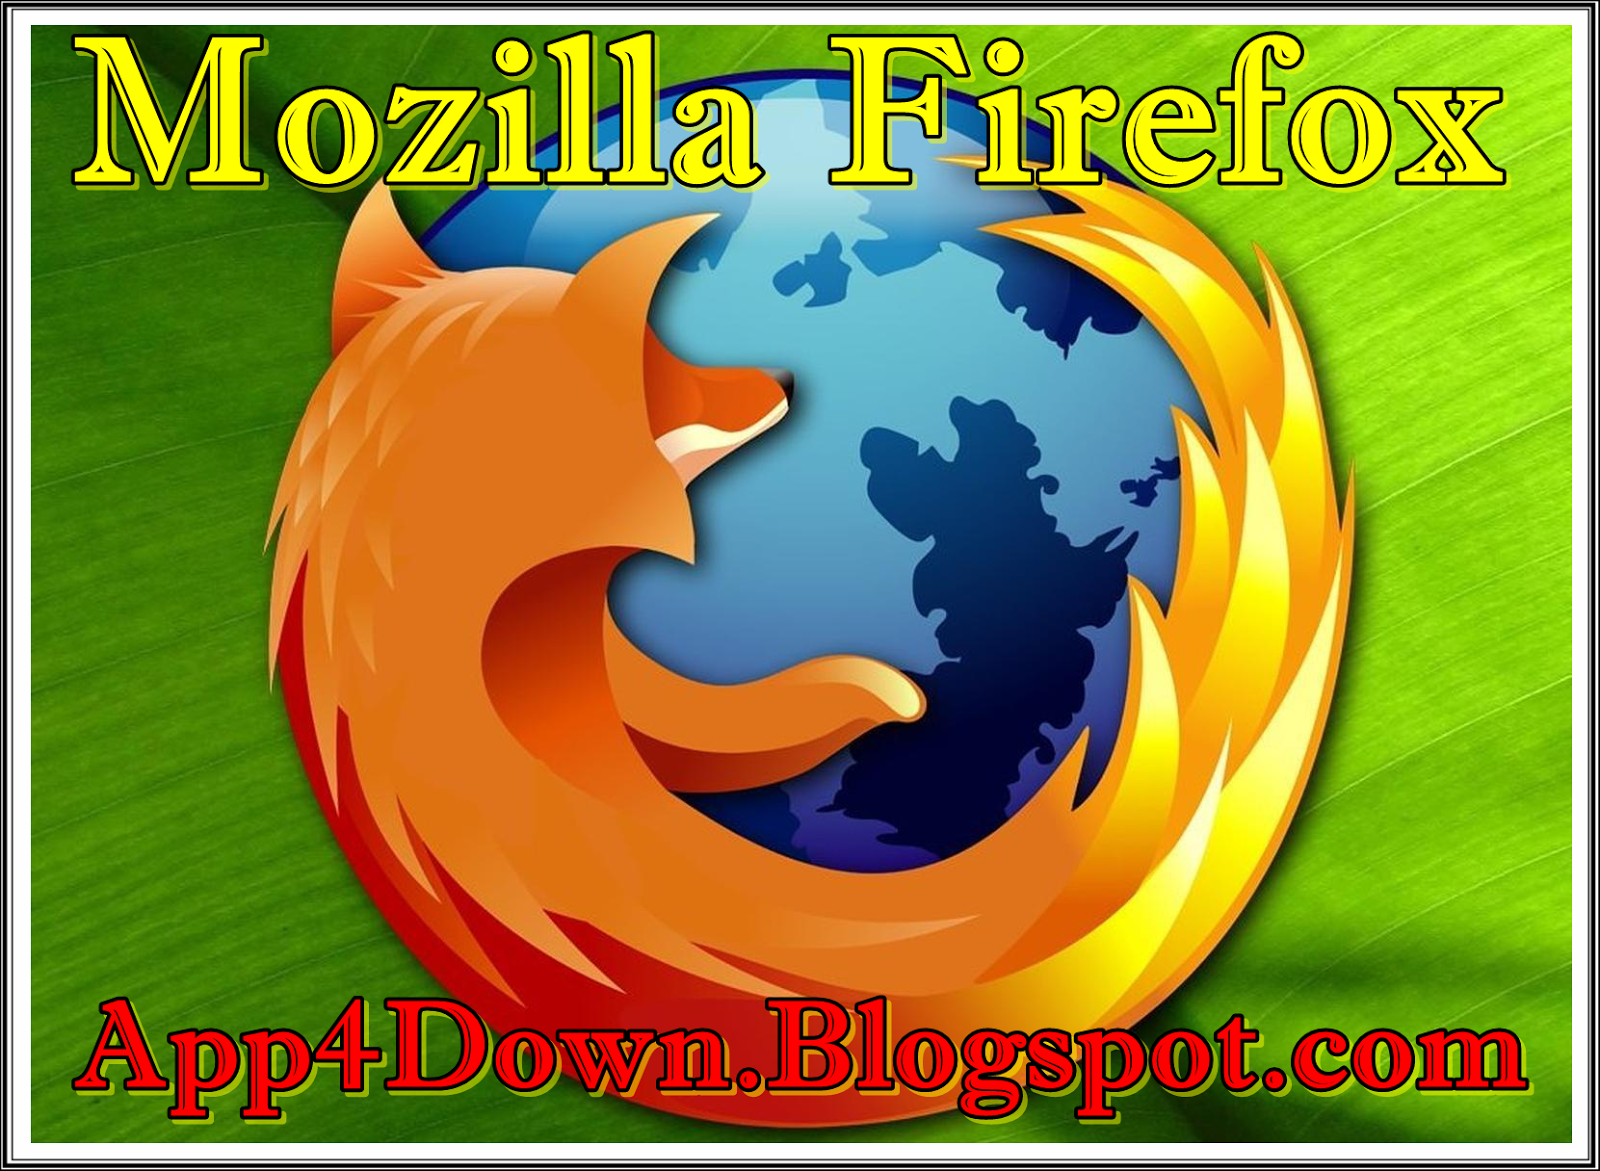 Free Download Of Latest Mozilla Firefox For Windows 7